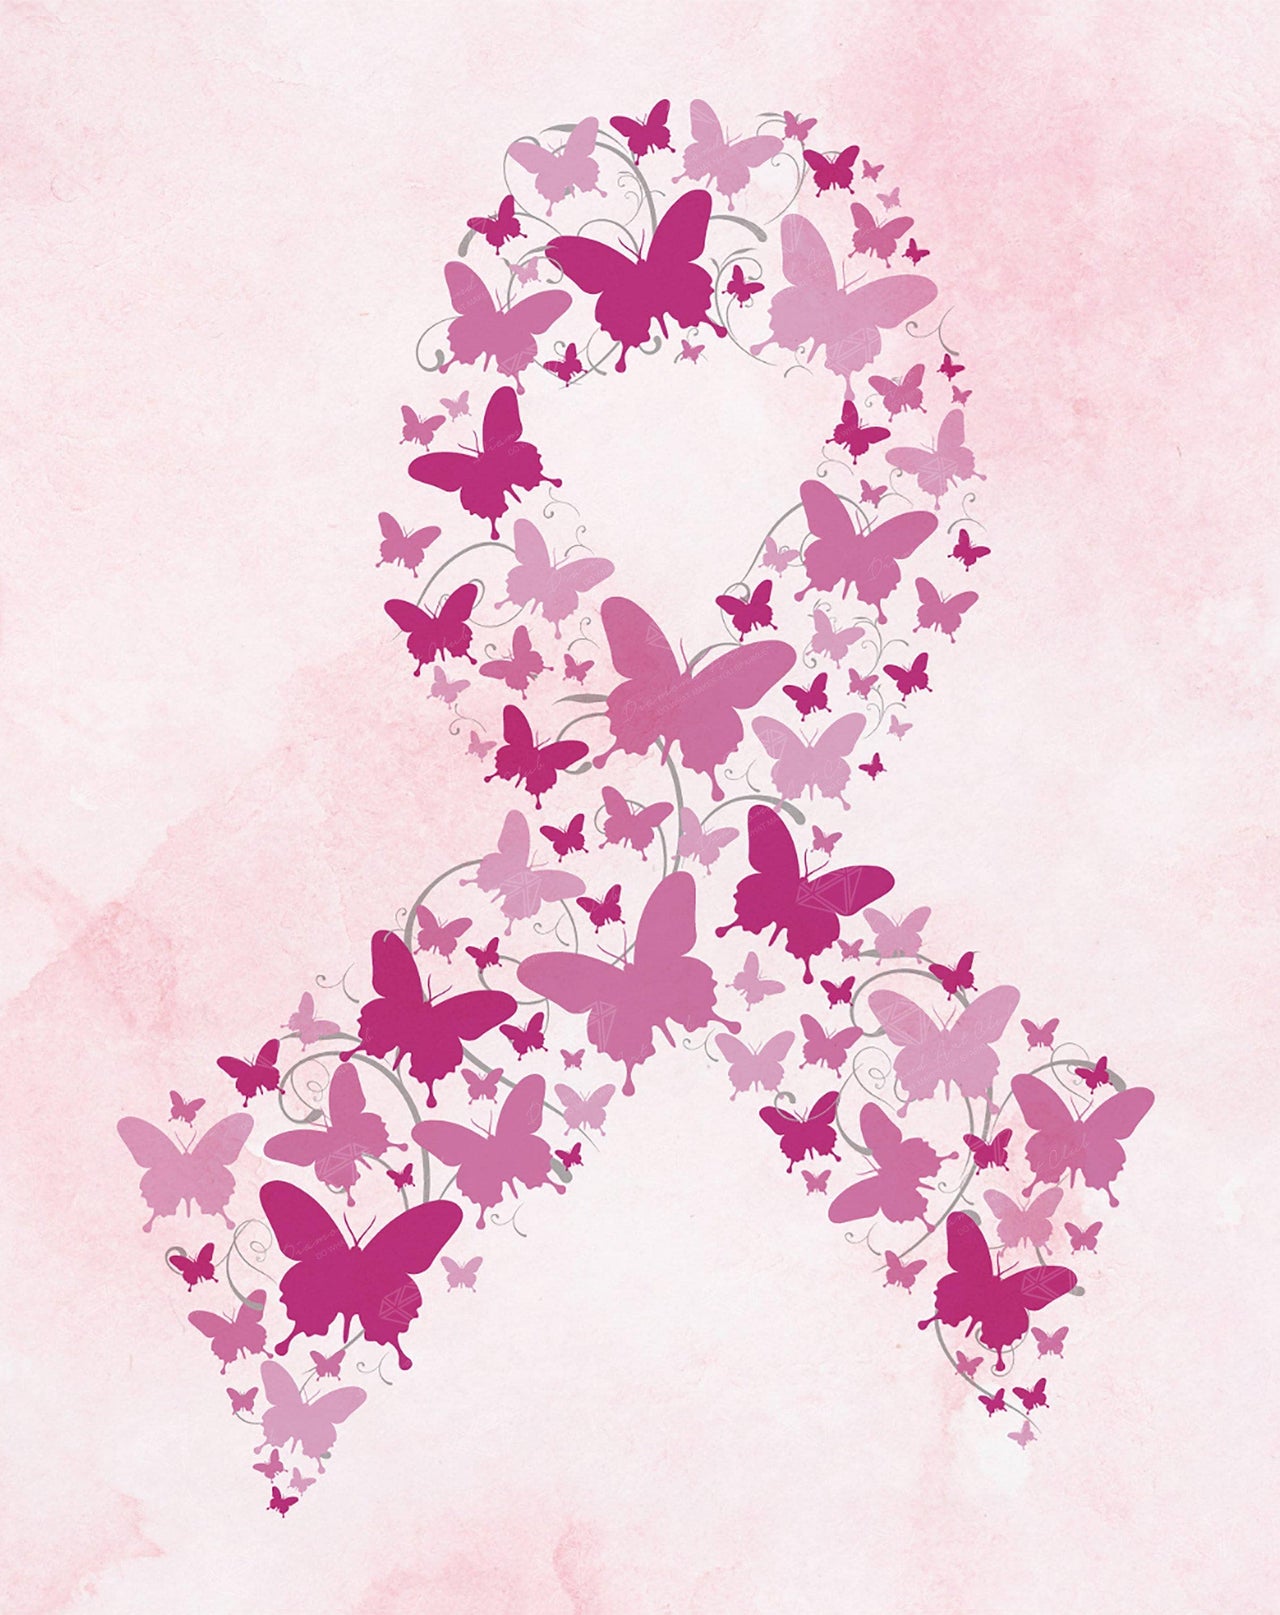 Diamond Painting Butterfly Breast Cancer Ribbon (final edition) 22″ x 28" (56cm x 71cm) / Square with 4 Colors including 1 AB / 11,231